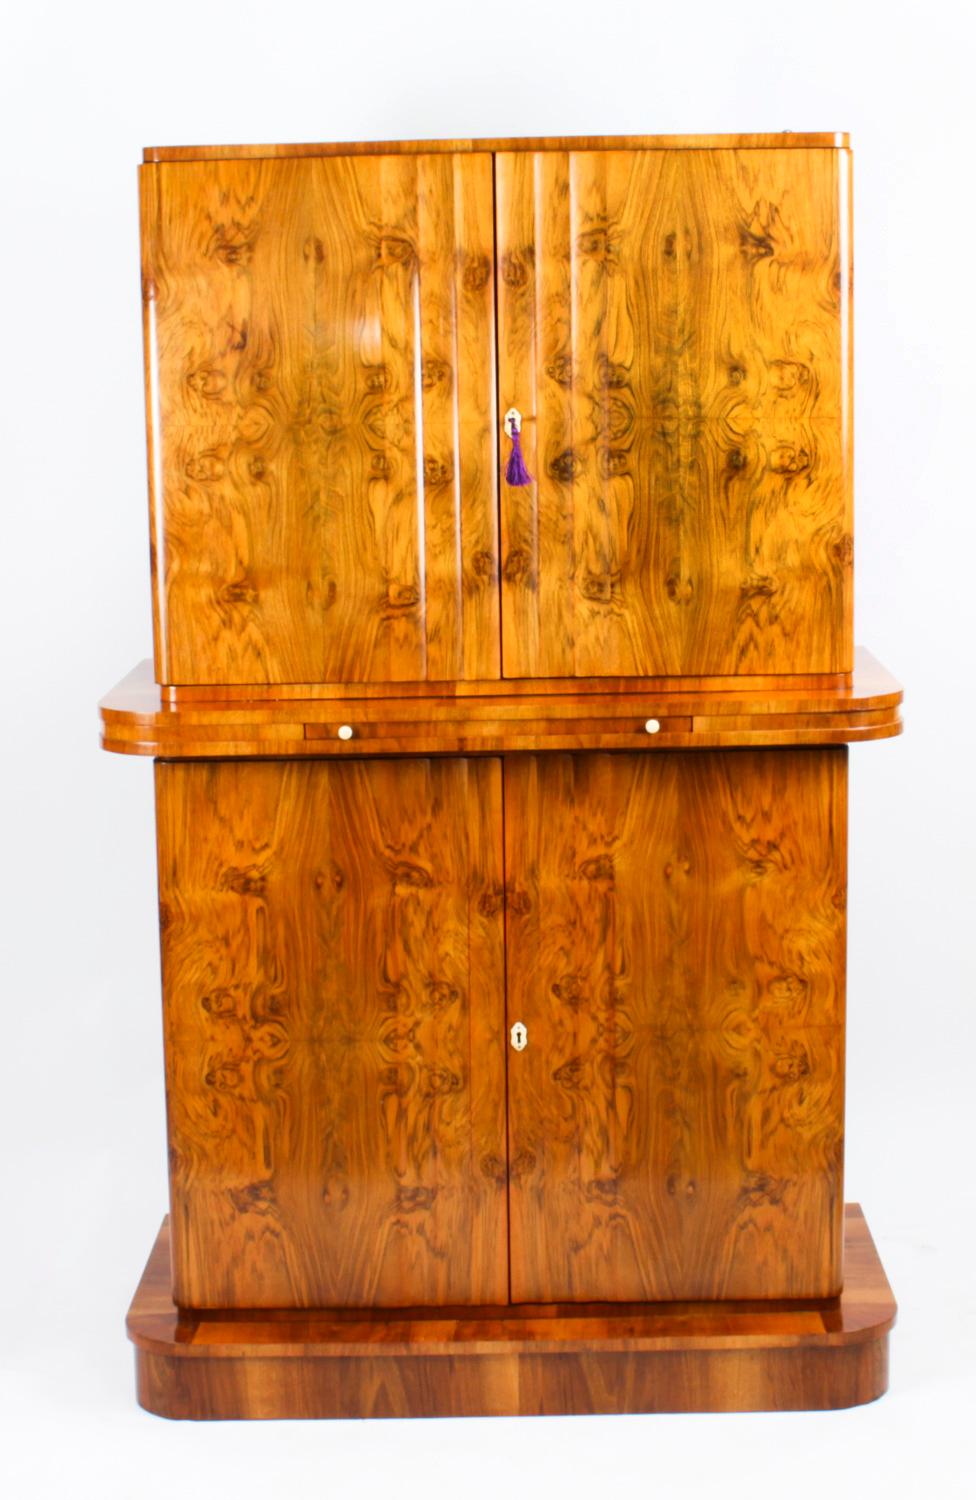 This is a fantastic antique Art Deco burr walnut cocktail cabinet, attributed to Epstein, with cut glasses and decanters, circa 1920 in date. 
 
There is no mistaking the timeless appeal of this highly collectable item and it would be a wonderful